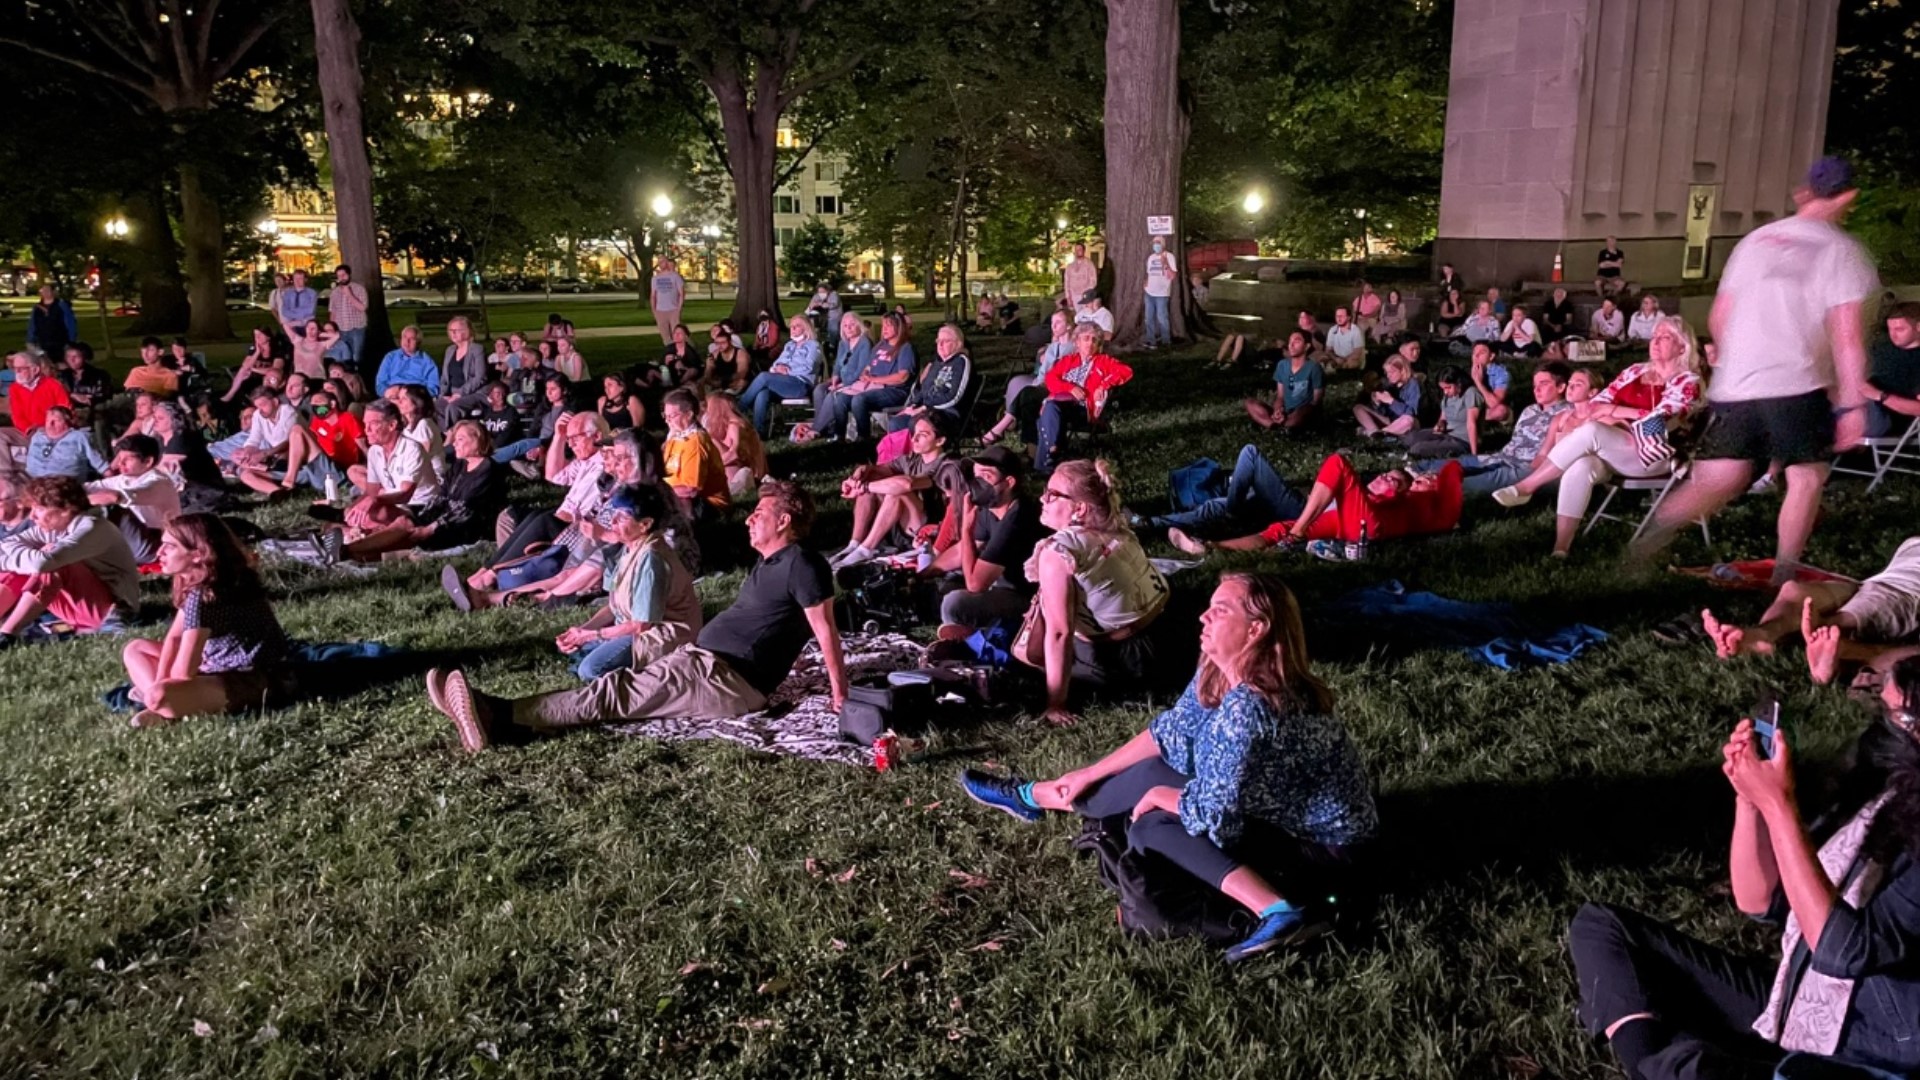 More than 100 people gathered a block away from the Capitol Building to view the first night of the hearing on an outdoor projection screen.